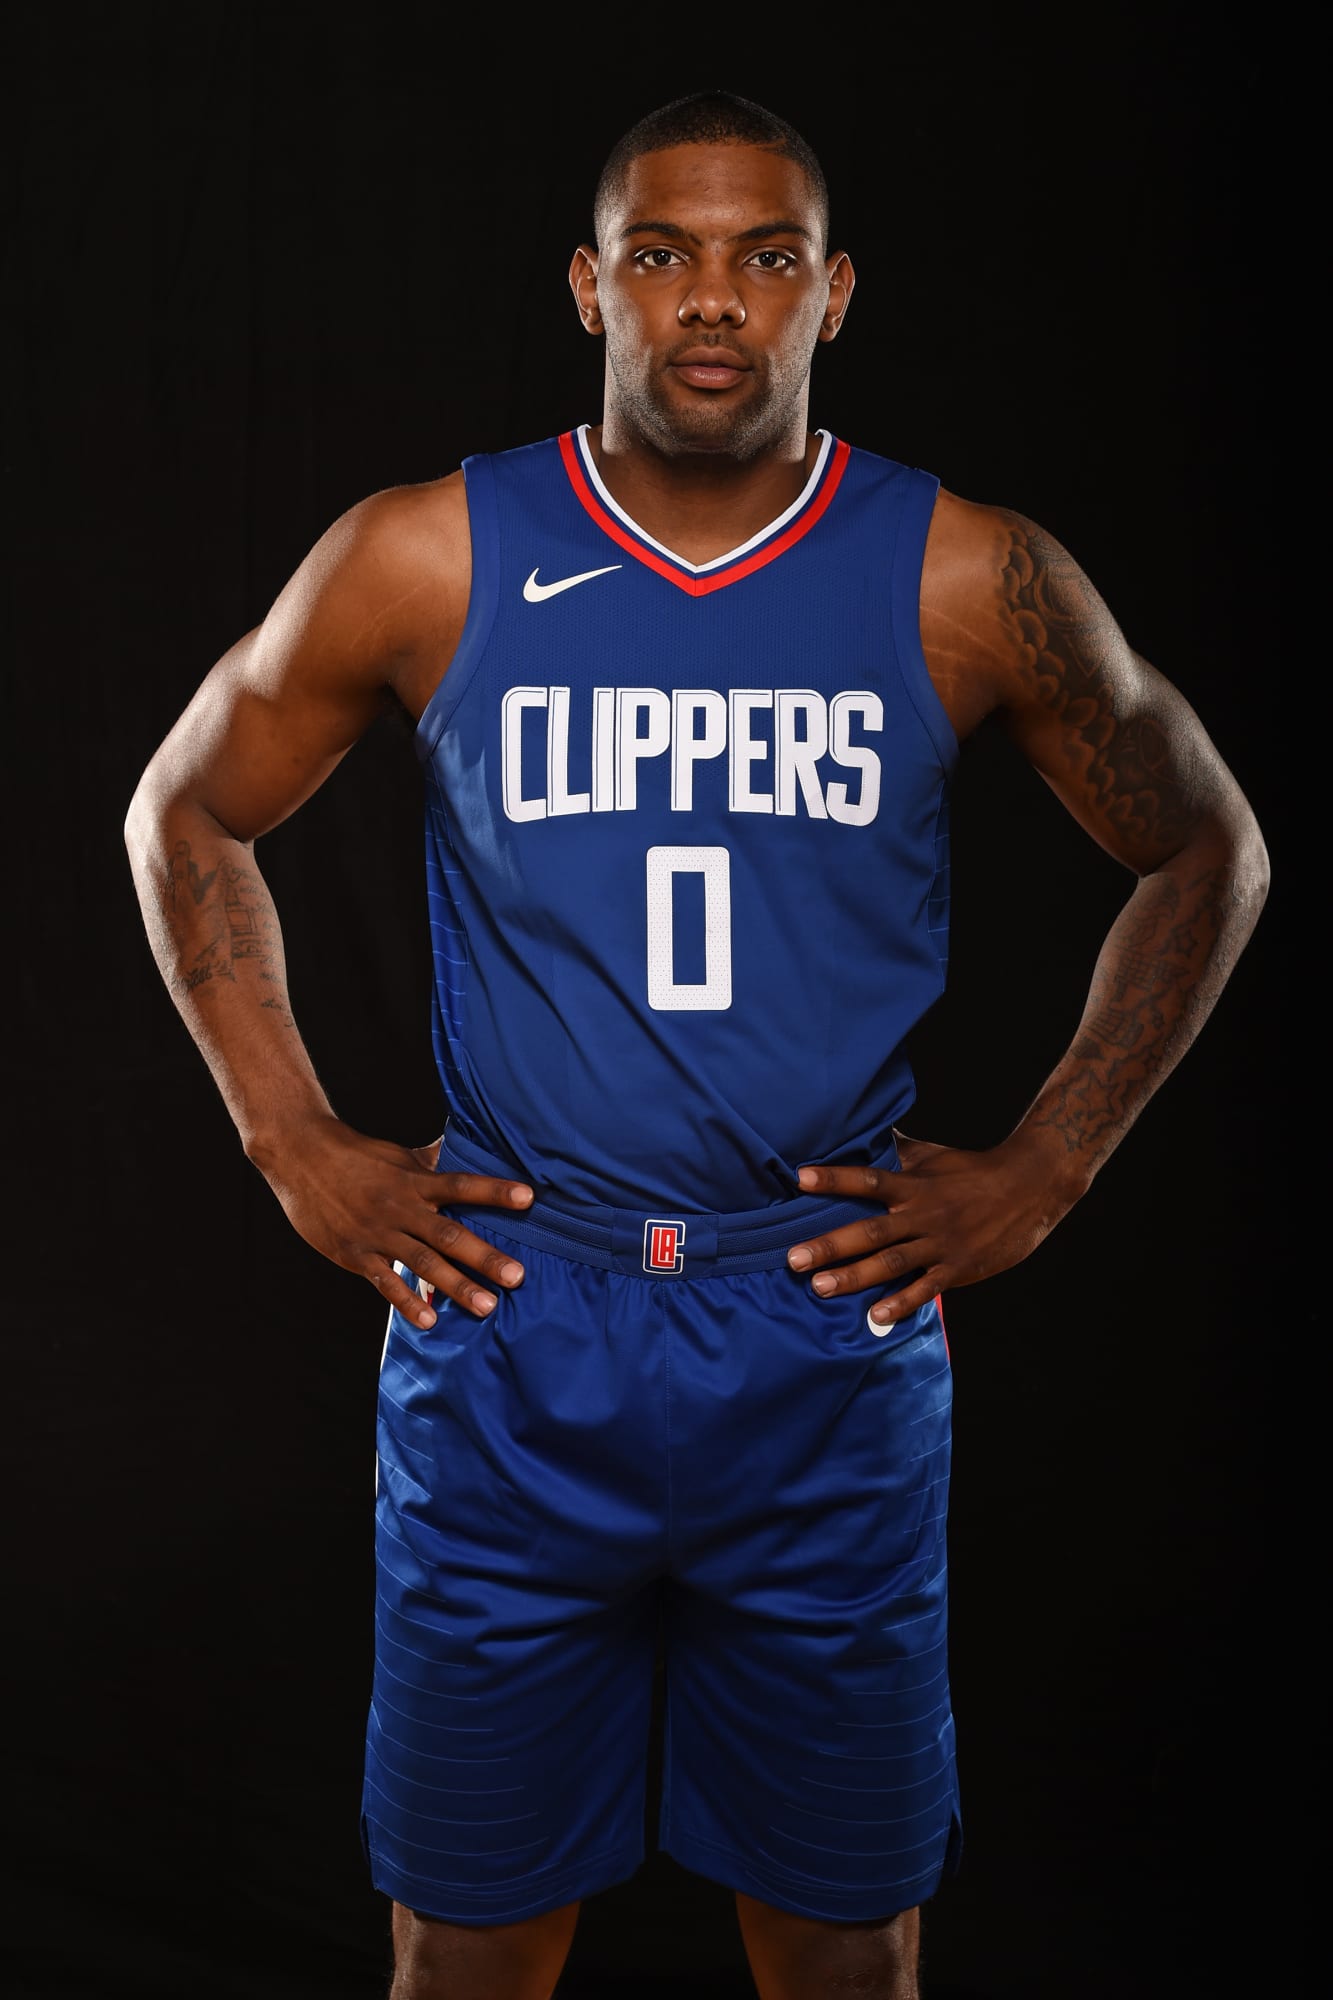 Speculation: What Will the Next LA Clippers Jersey Look Like?